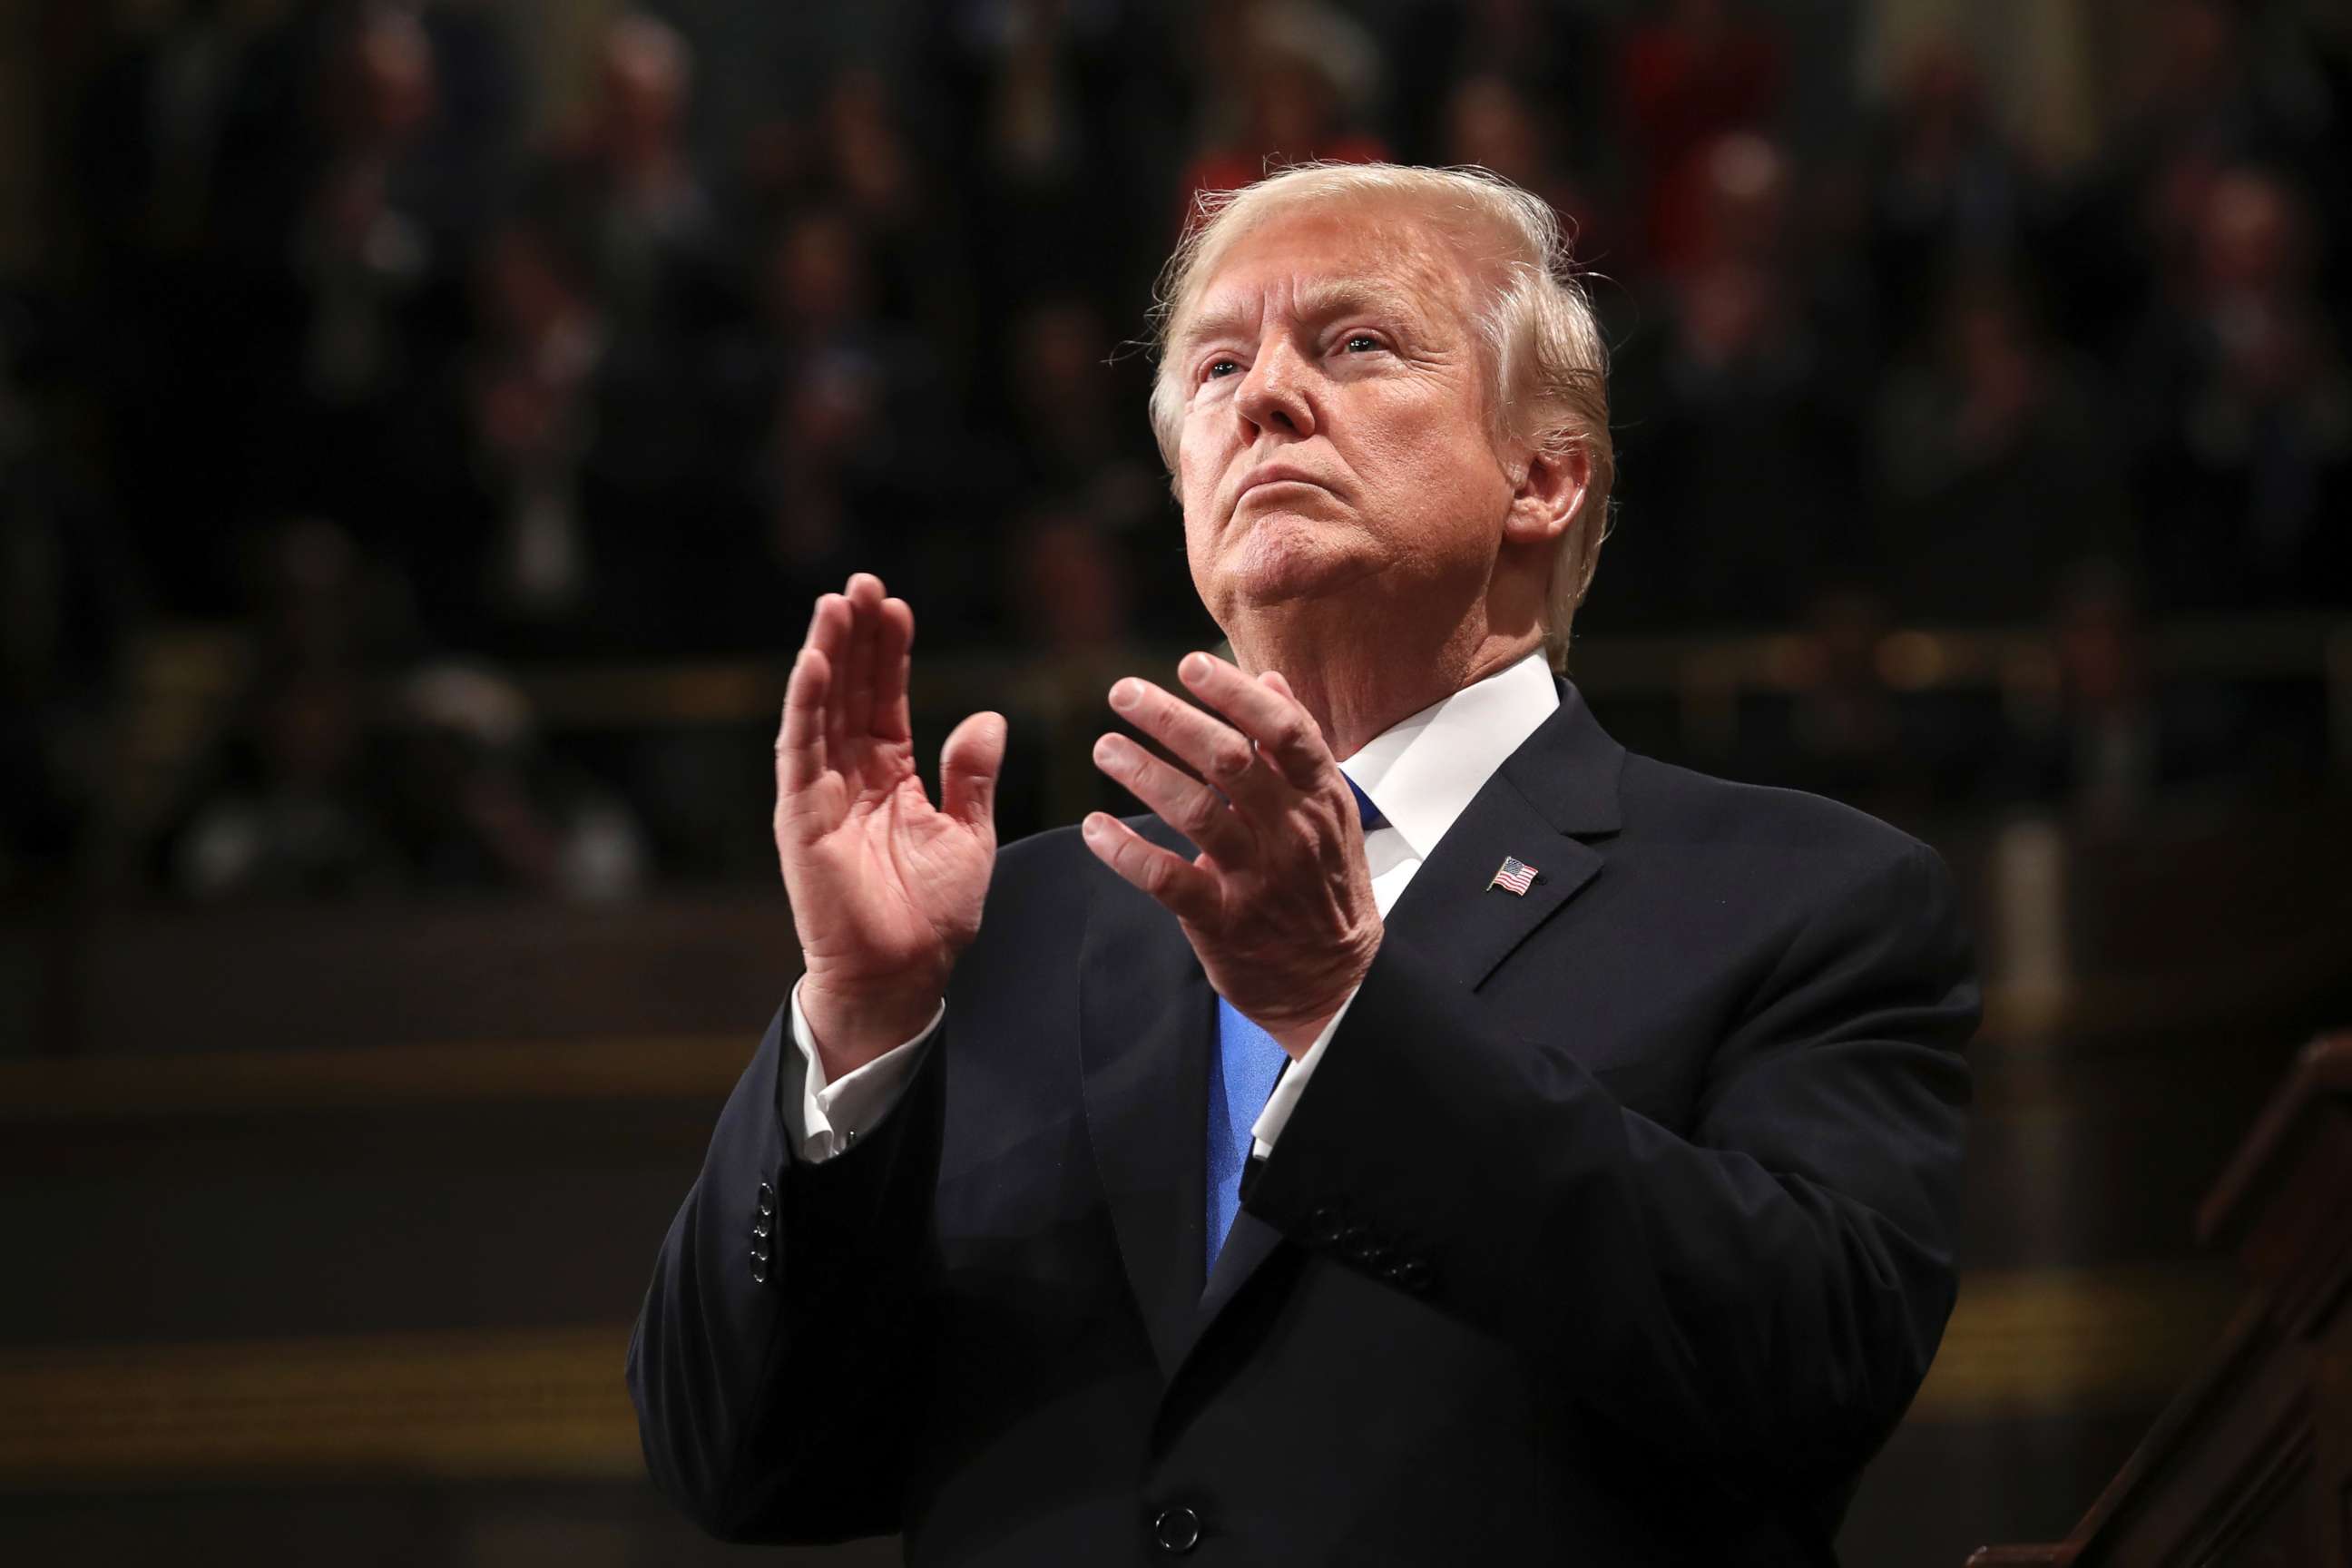 PHOTO: President Donald Trump claps during the State of the Union address in the House chamber of the U.S. Capitol to a joint session of Congress, Jan. 30, 2018 in Washington.